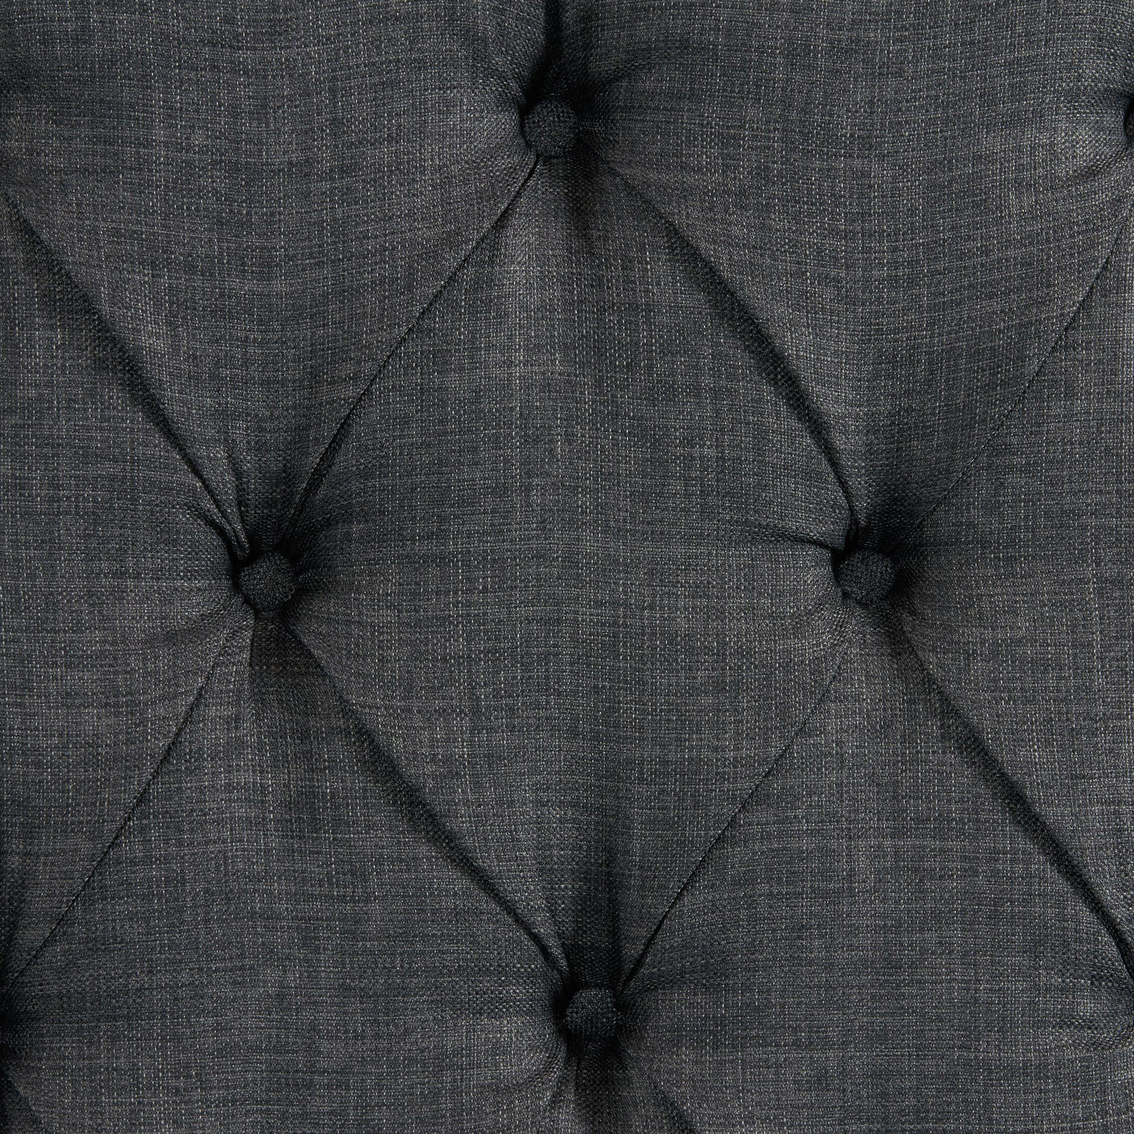 Elements Morrow Bed, Heirloom Charcoal - Image 7 of 7